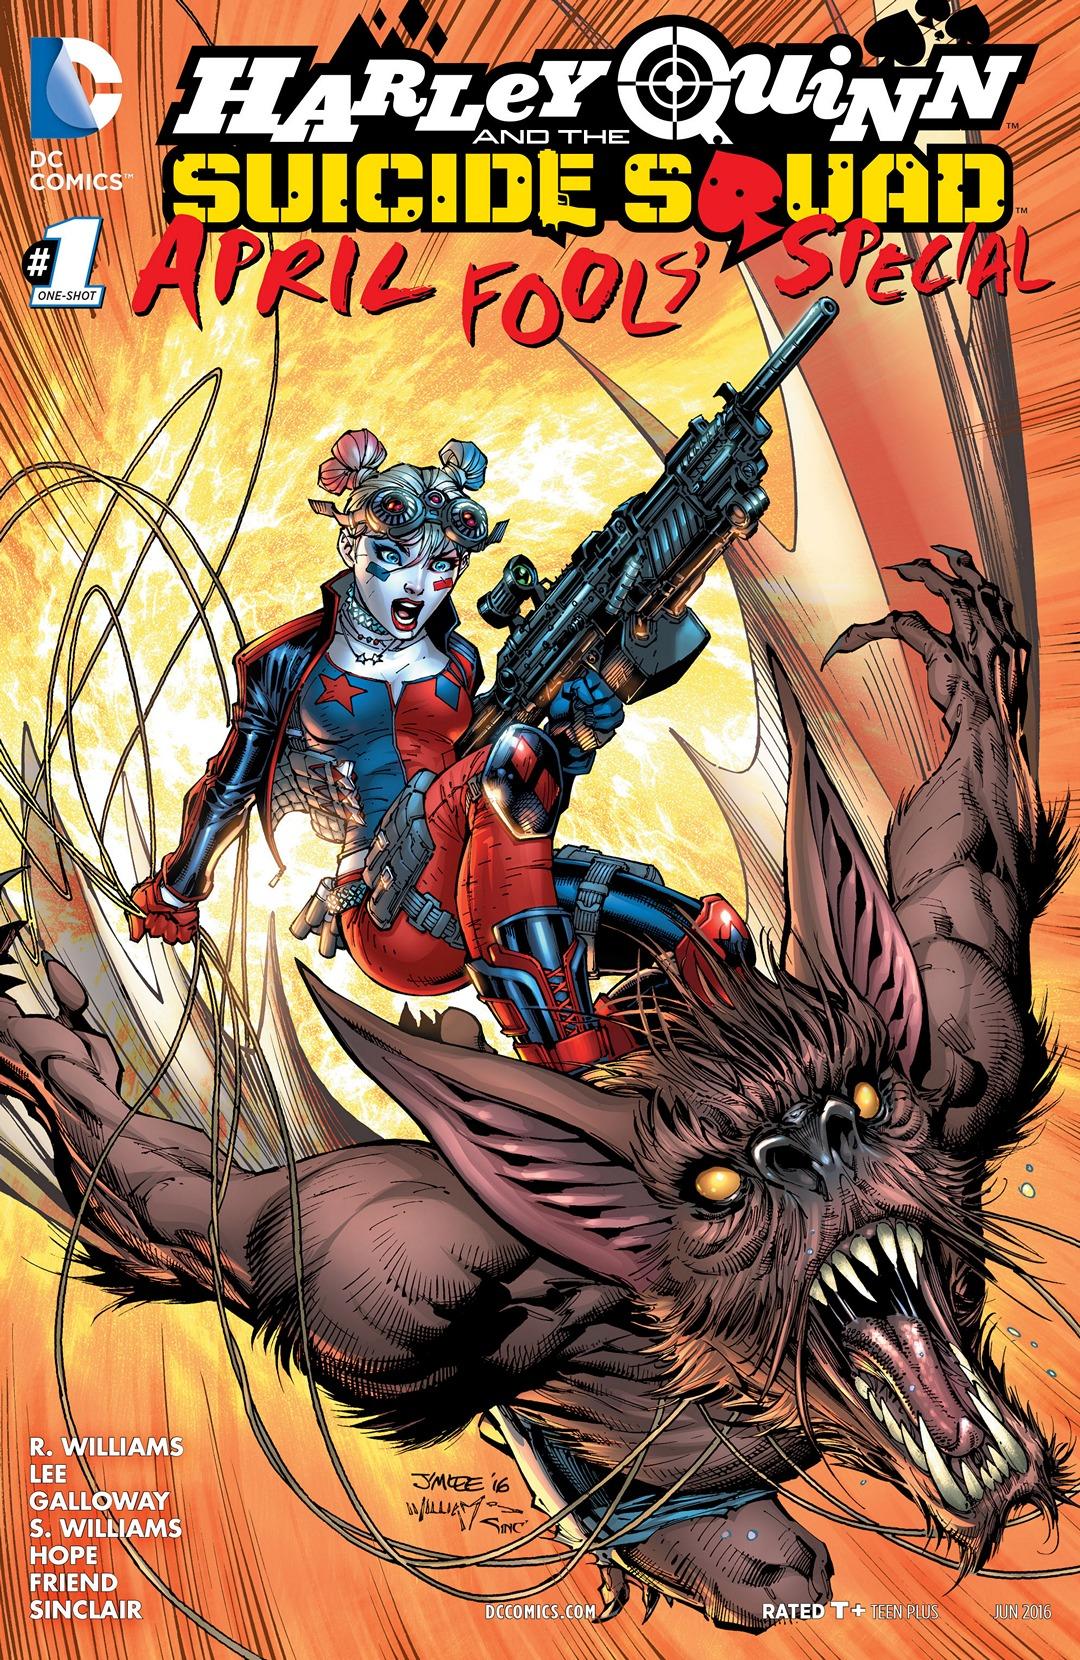 Harley Quinn and the Suicide Squad April Fool's Special Vol. 1 #1